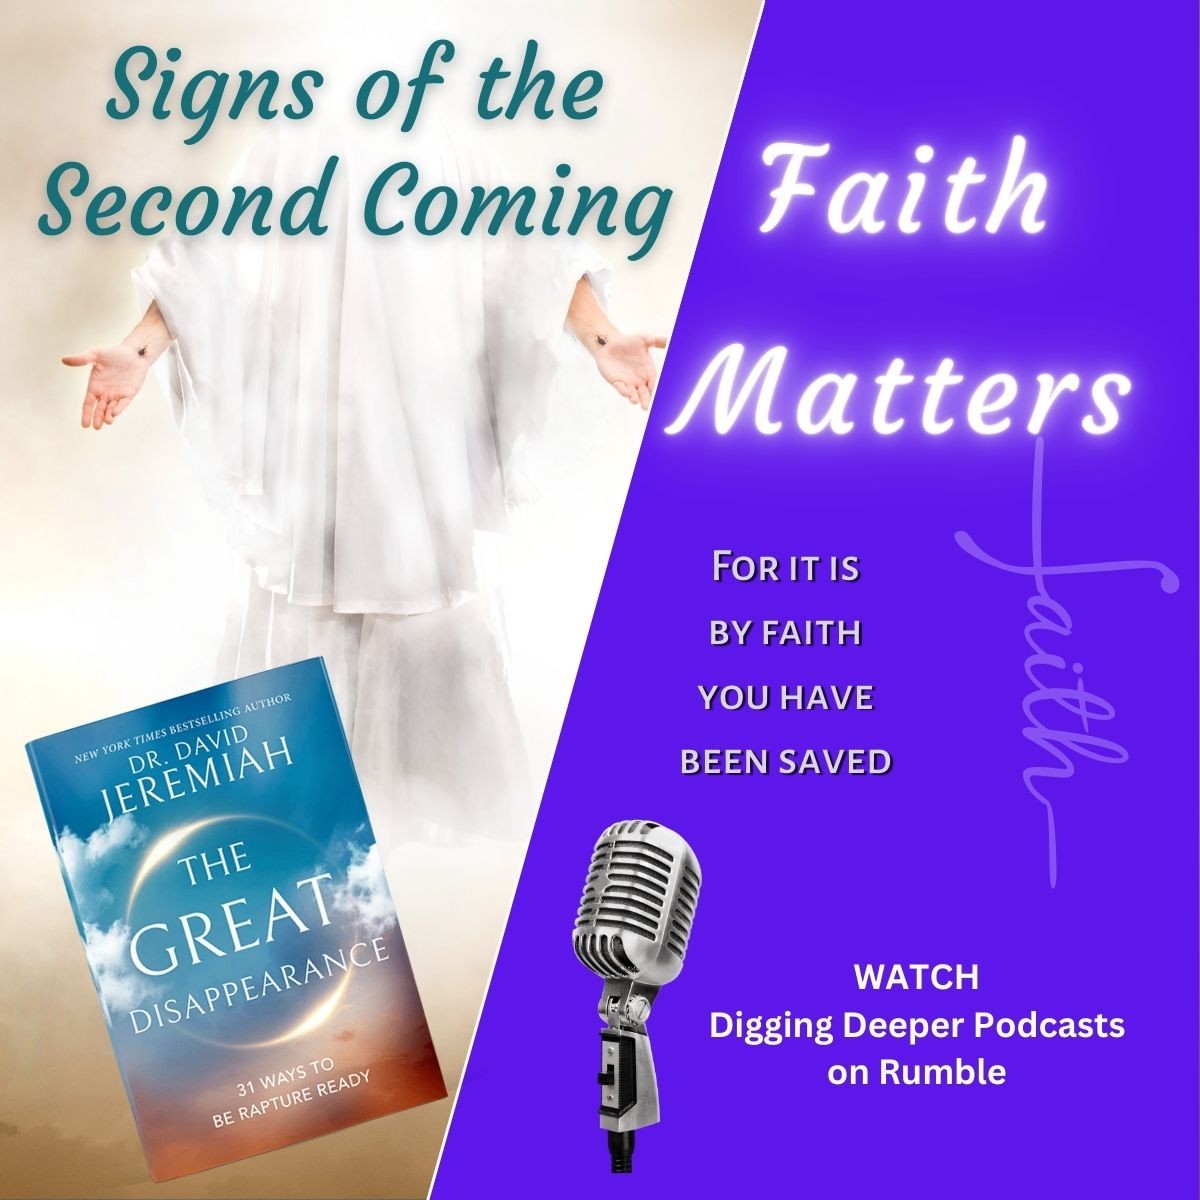 Ch 27 Signs of the Second Coming – The Great Disappearance